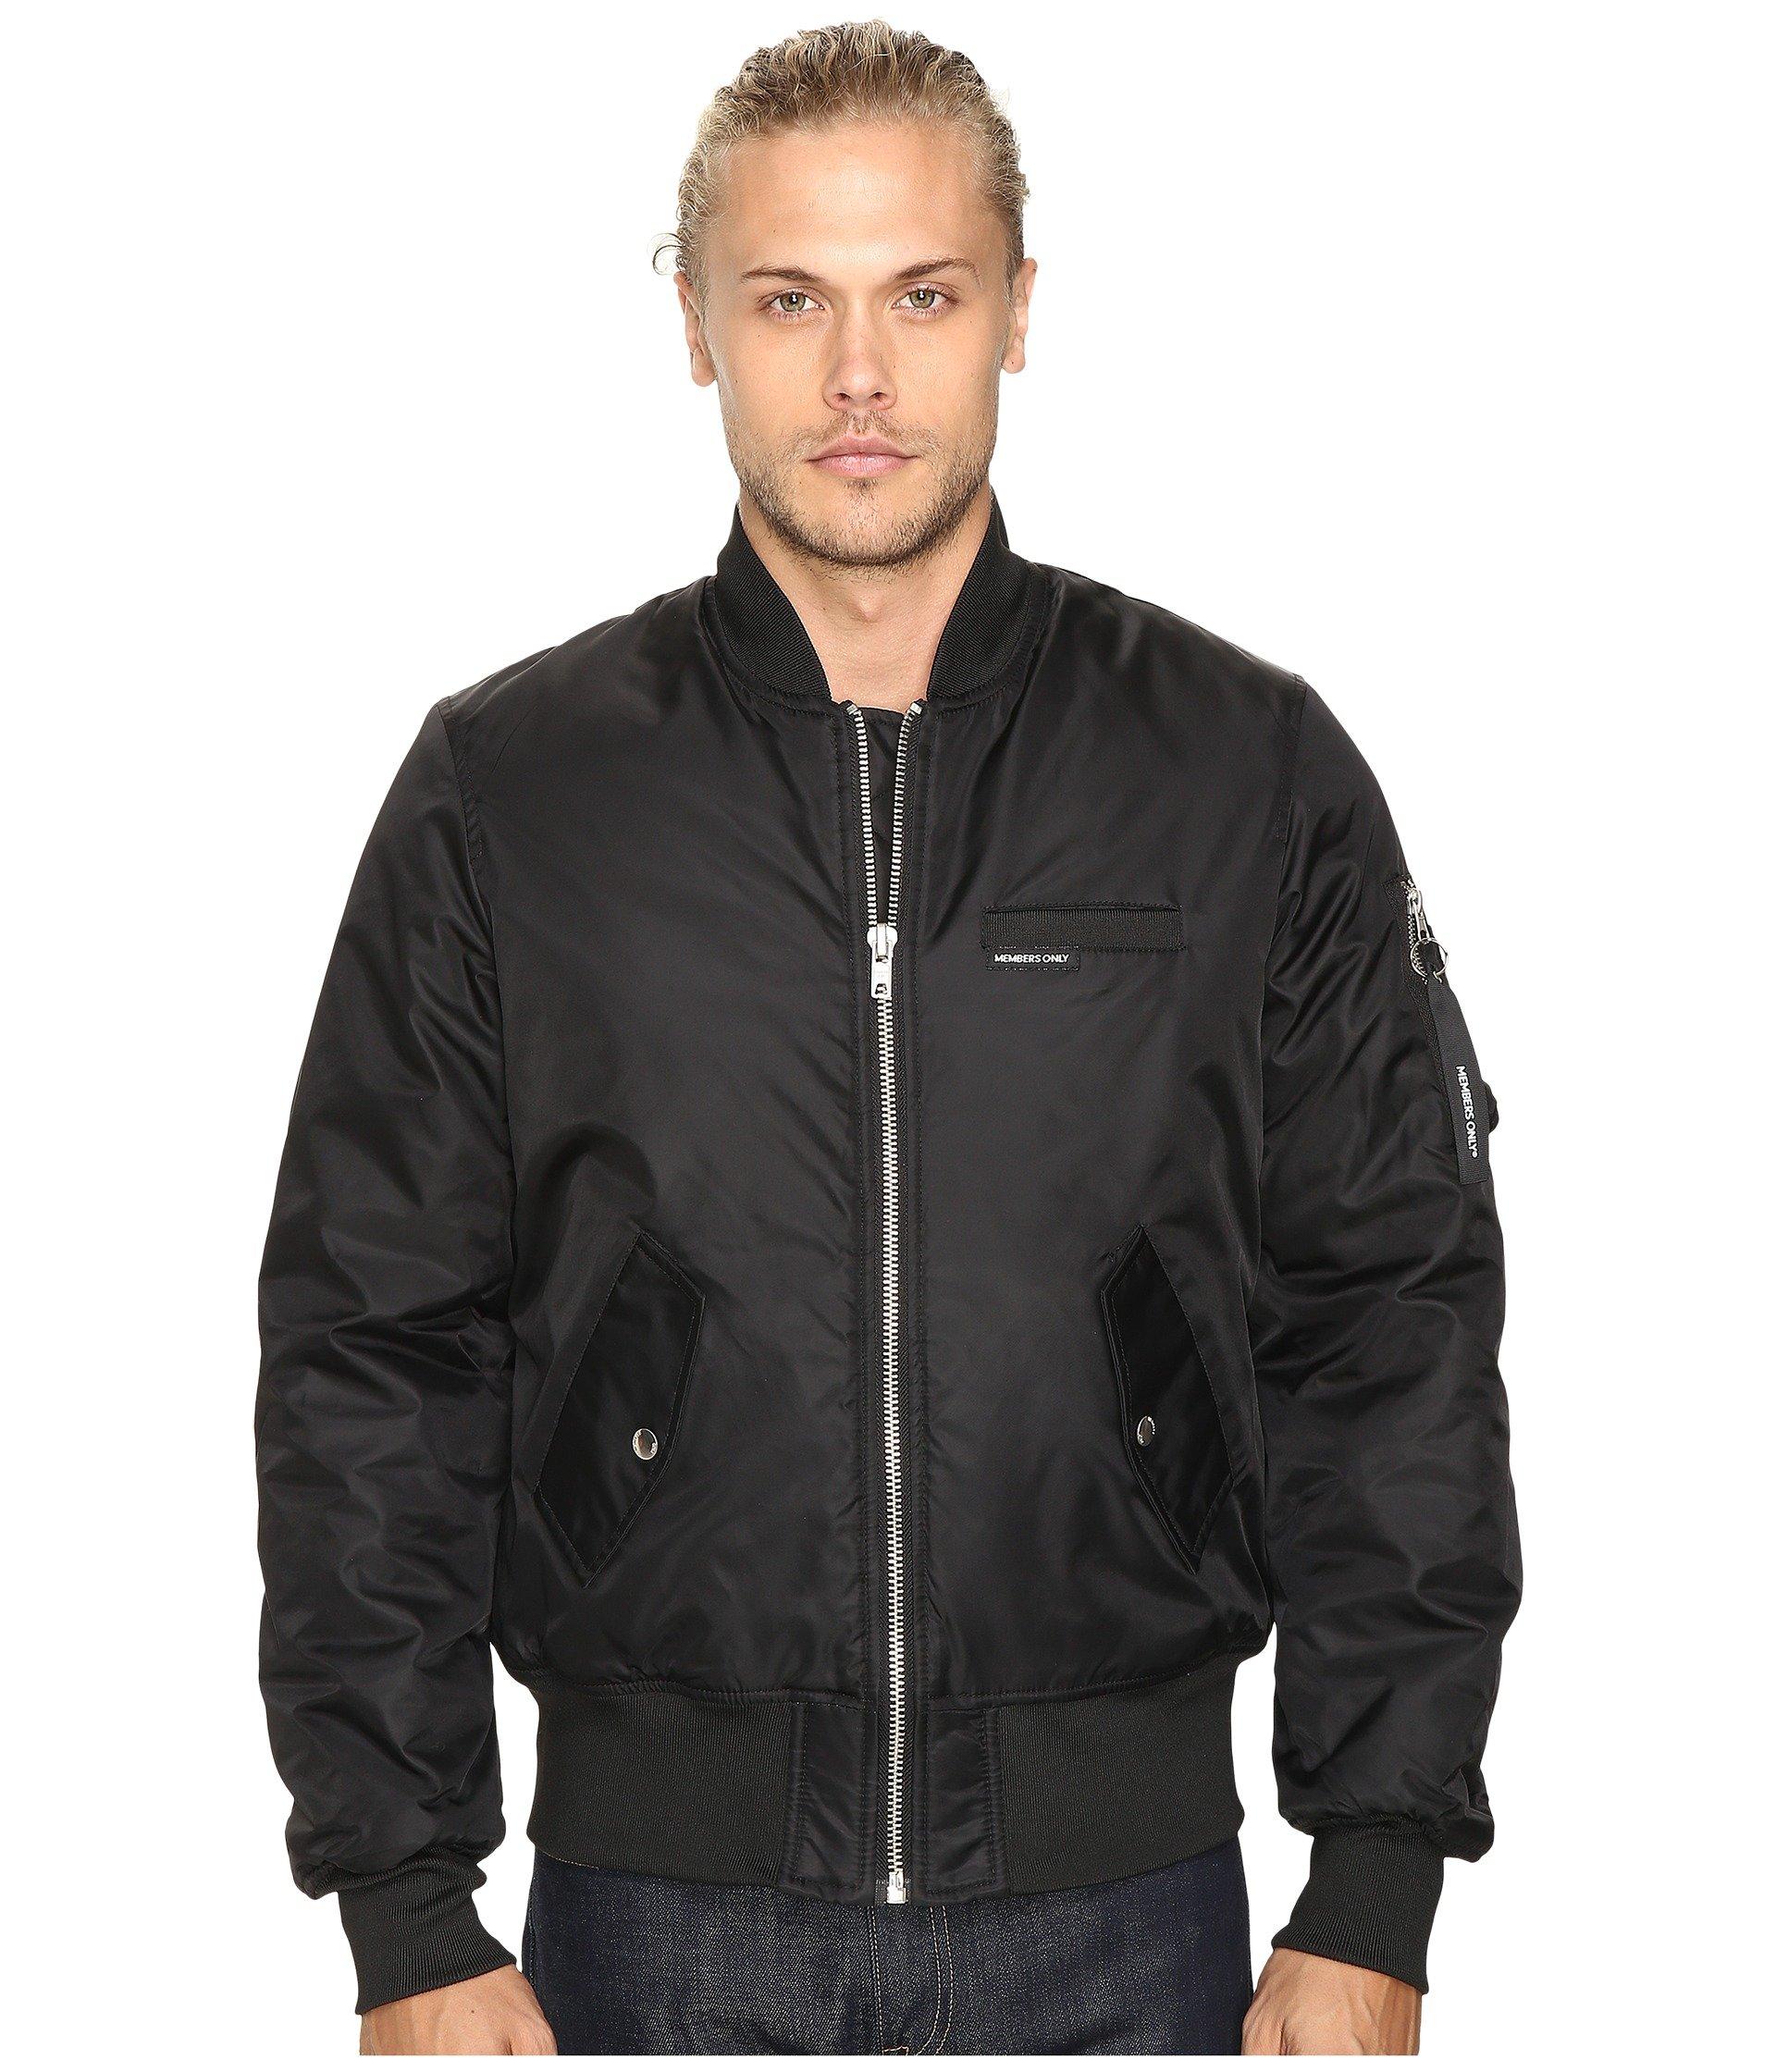 Lyst - Members Only Authentic Military Bomber Jacket in Black for Men